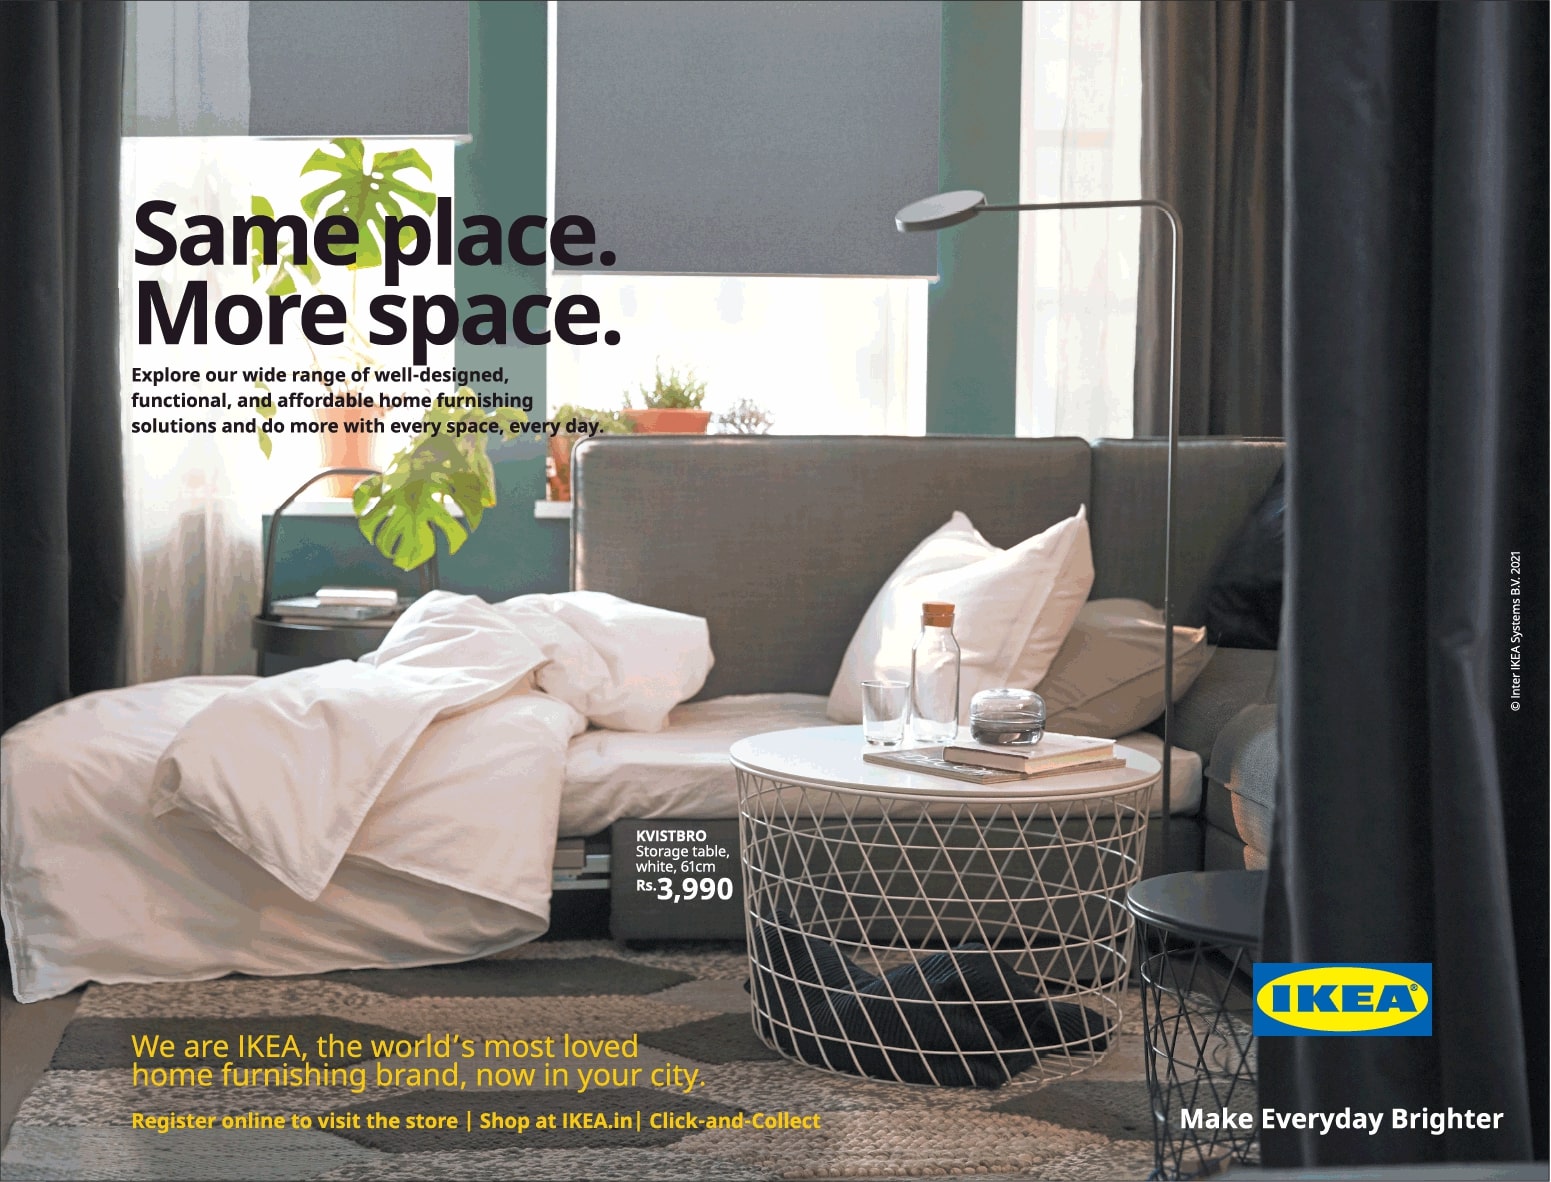 ikea-same-place-more-space-we-are-ikea-the-worlds-most-loved-home-furnishing-brand-now-in-your-city-ad-times-of-india-mumbai-10-01-2021